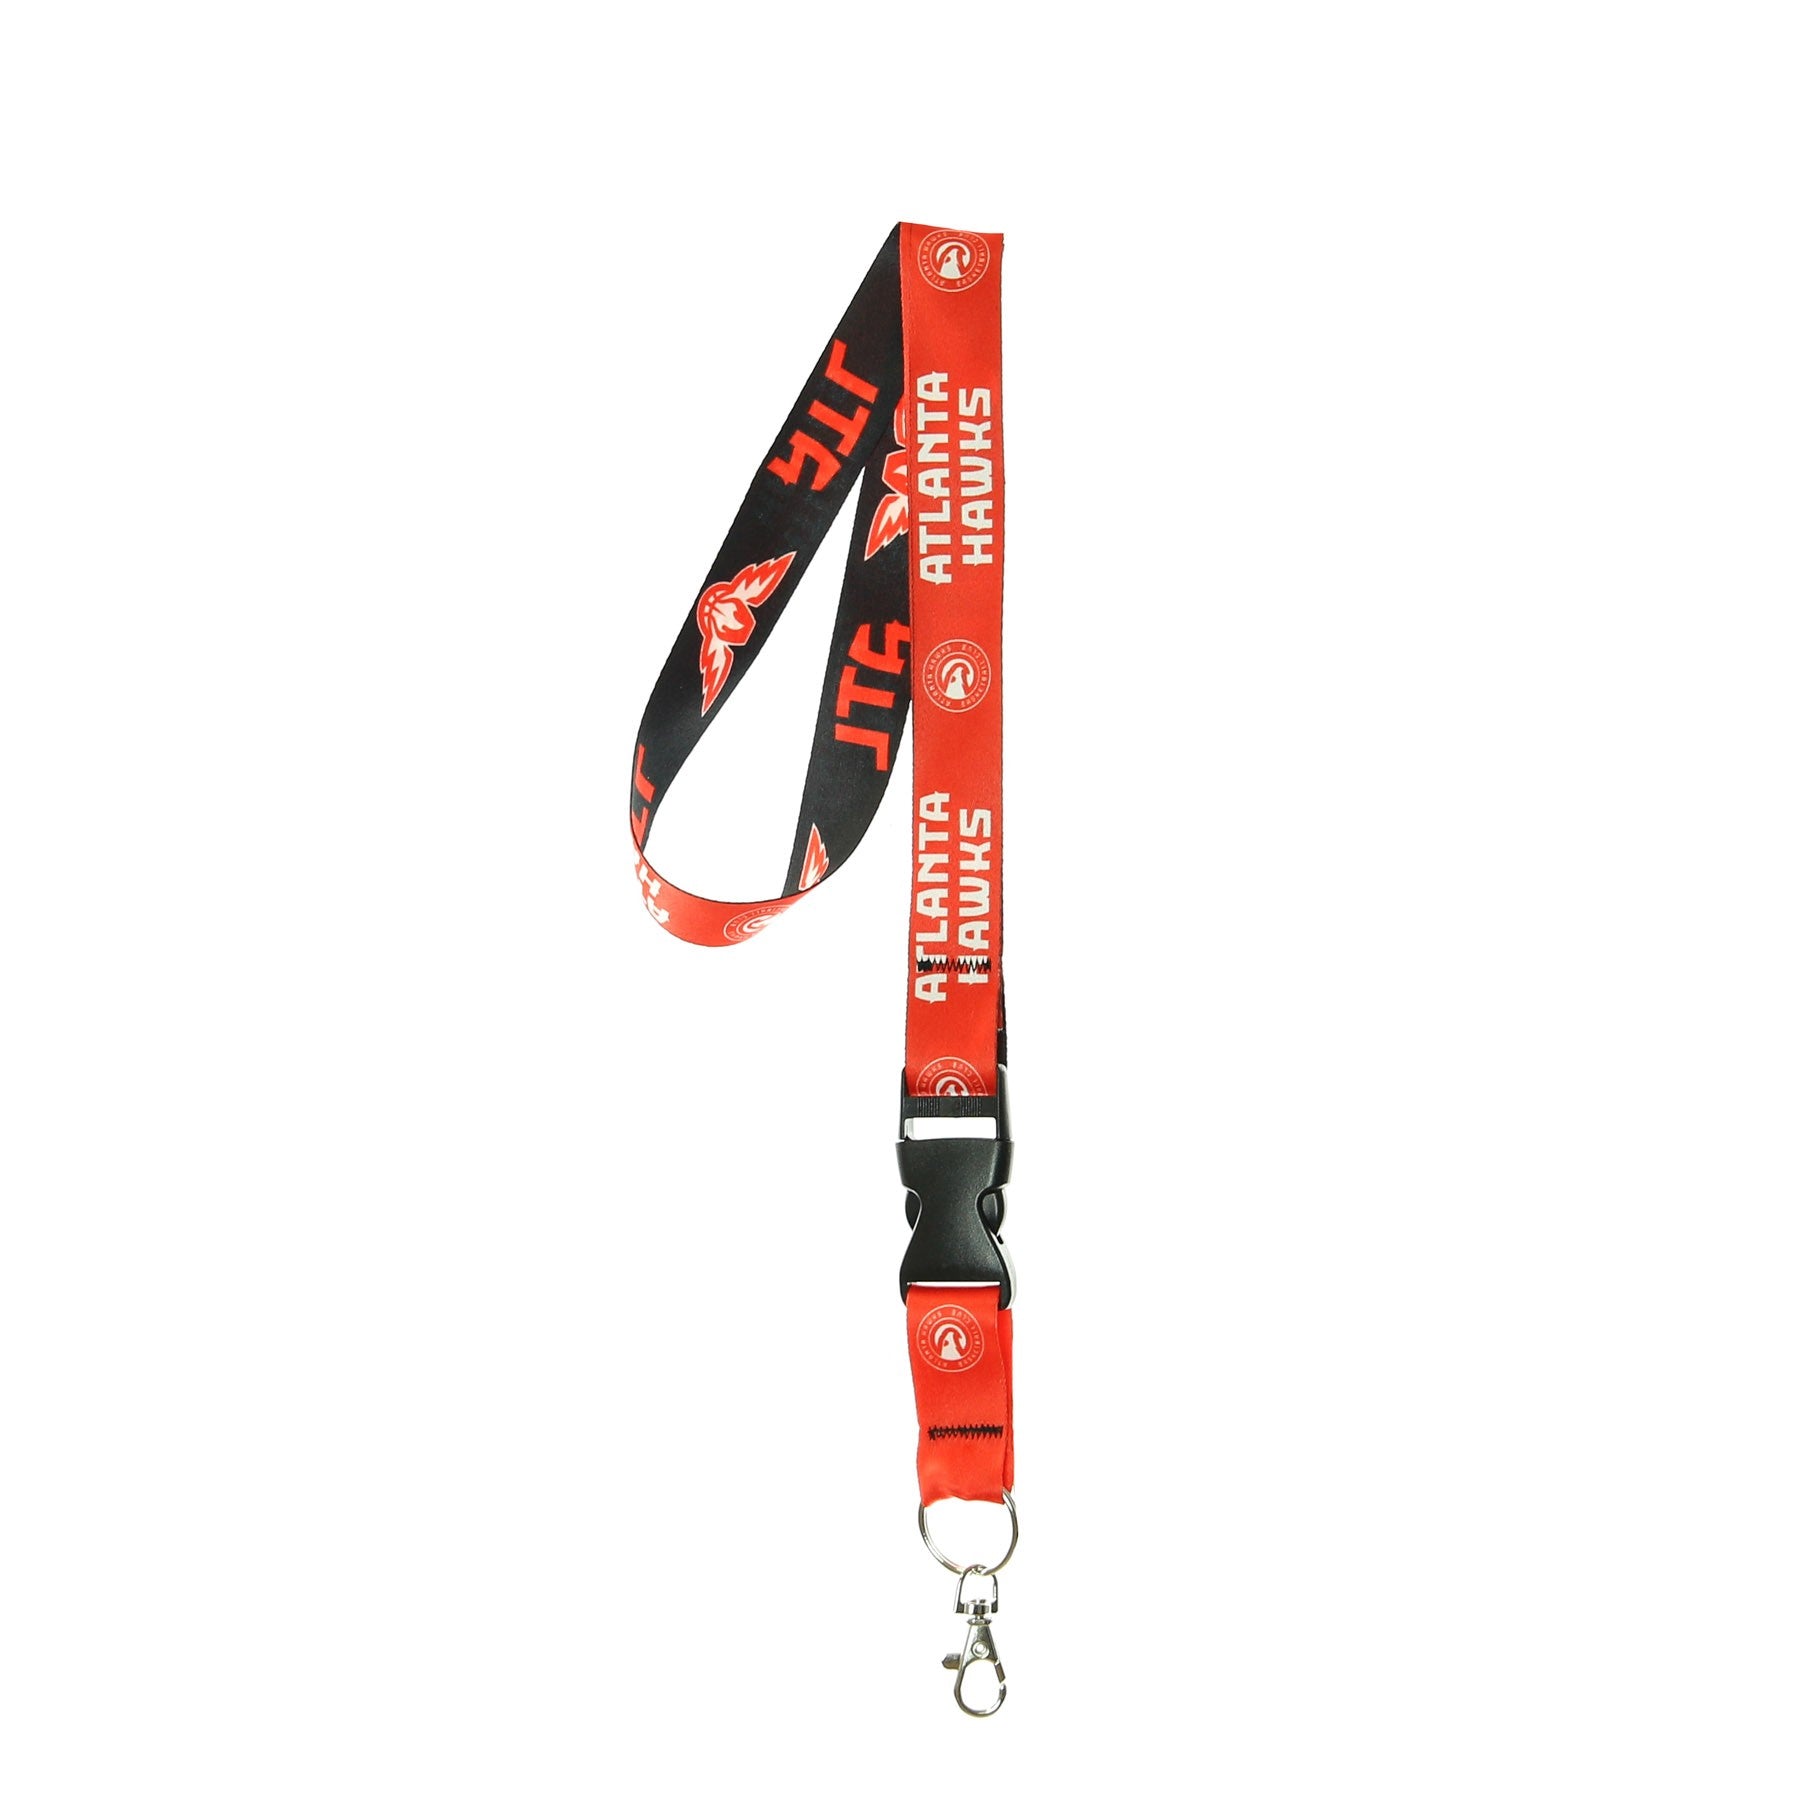 Unisex Nba Lanyard Keychain With Buckle Atlhaw Original Team Colors